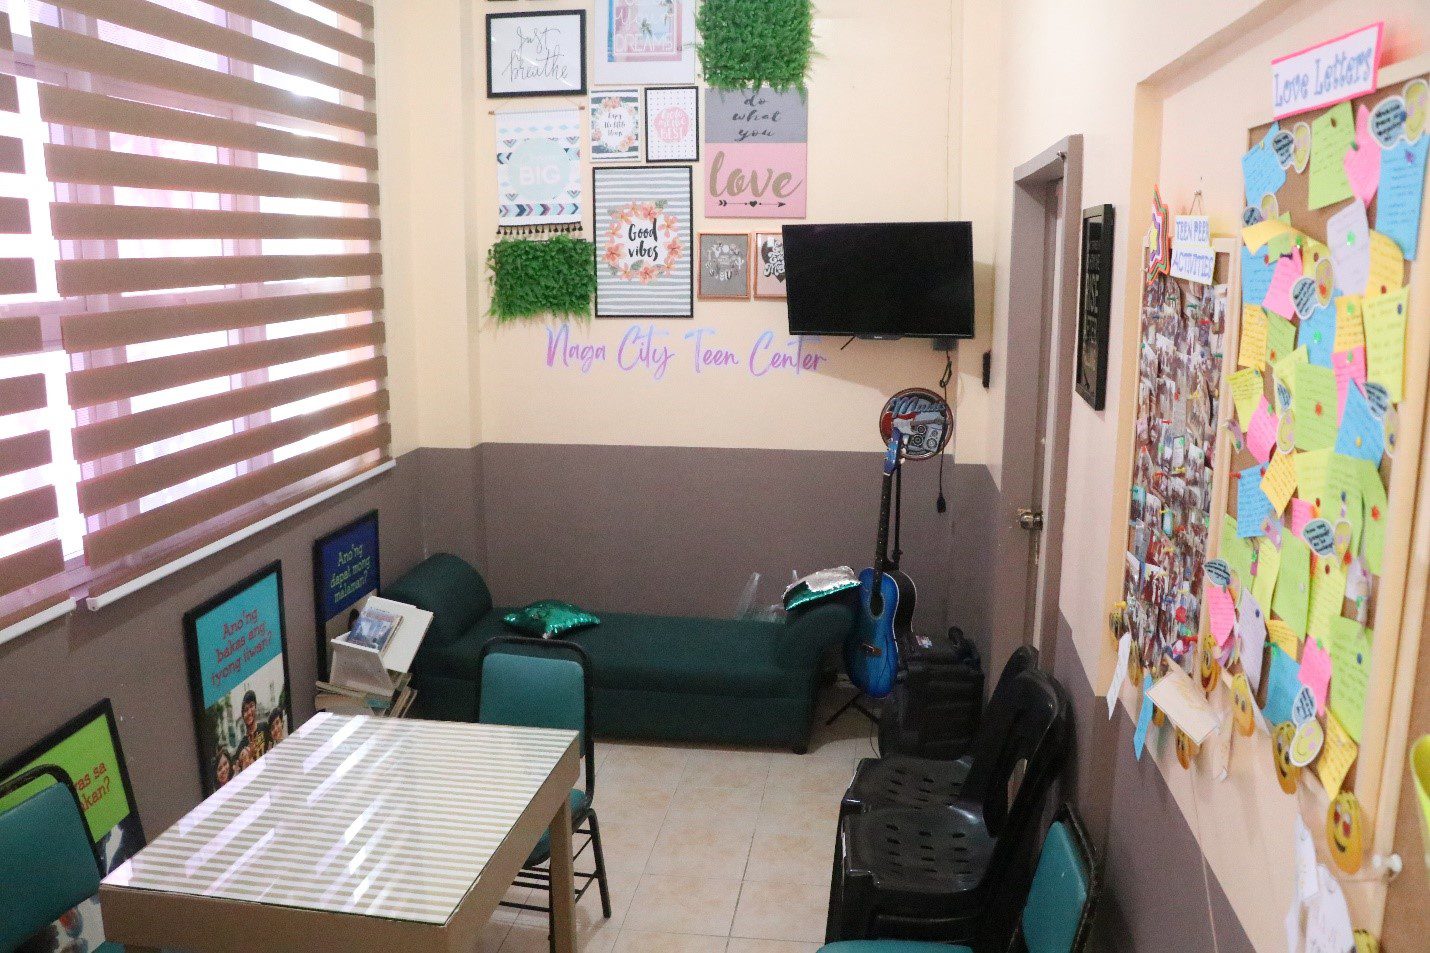 THE Naga City Teen Center at the City Planning and Nutrition Office where teenagers, especially young girls, receive direct interventions toward the prevention of risky sexual and non-sexual behaviors. The center, which is being manned by peer counsellors, lays out the opportunity for the young ones to talk about various issues and concerns affecting them.